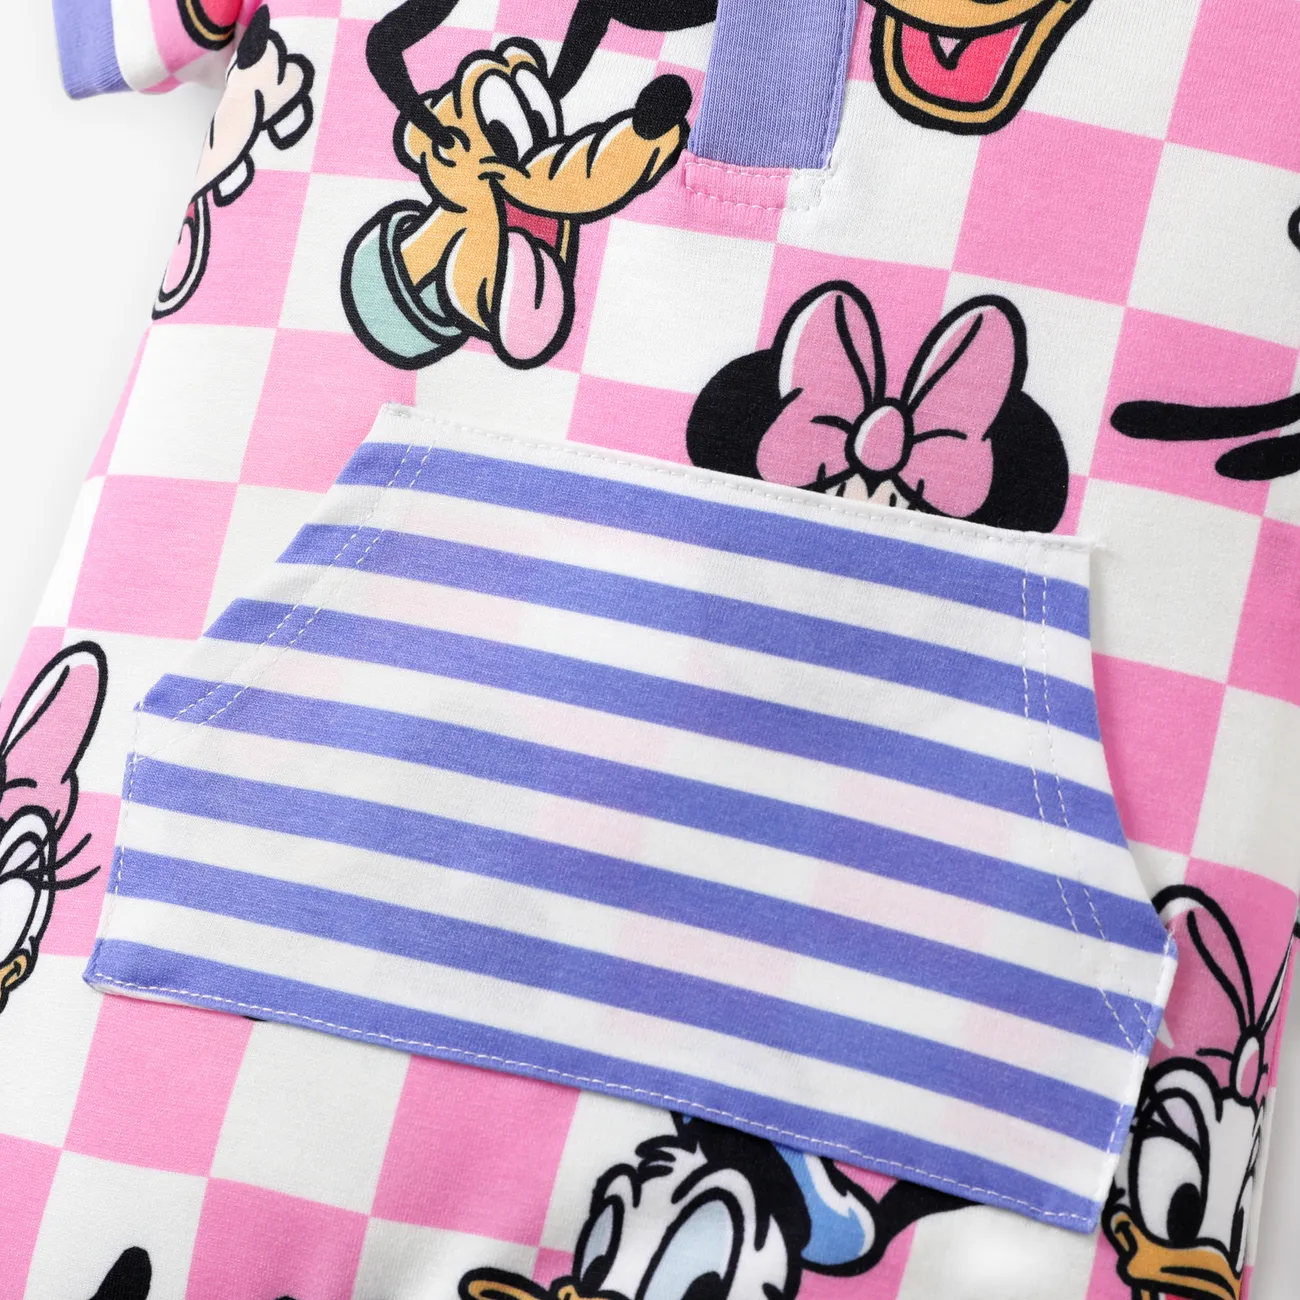 Disney Mickey and Friends 1pc Baby Boys/Girls Naia™ Plaid/Striped Short-Sleeve Romper
 Pink big image 1